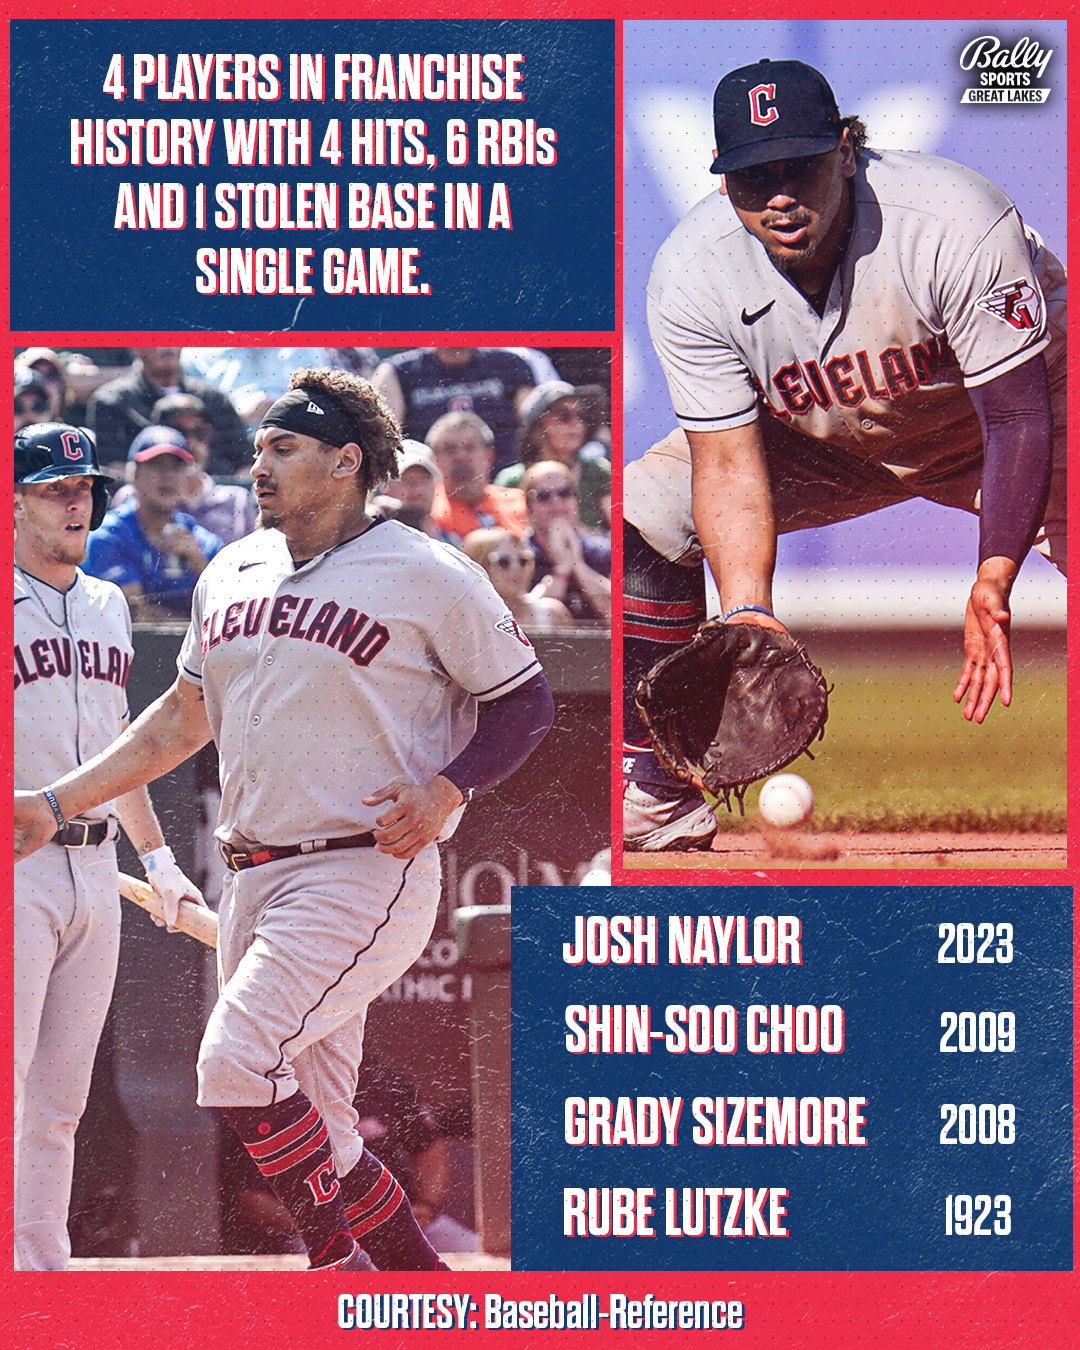 Bally Sports Cleveland on X: All kinds of history for Josh Naylor